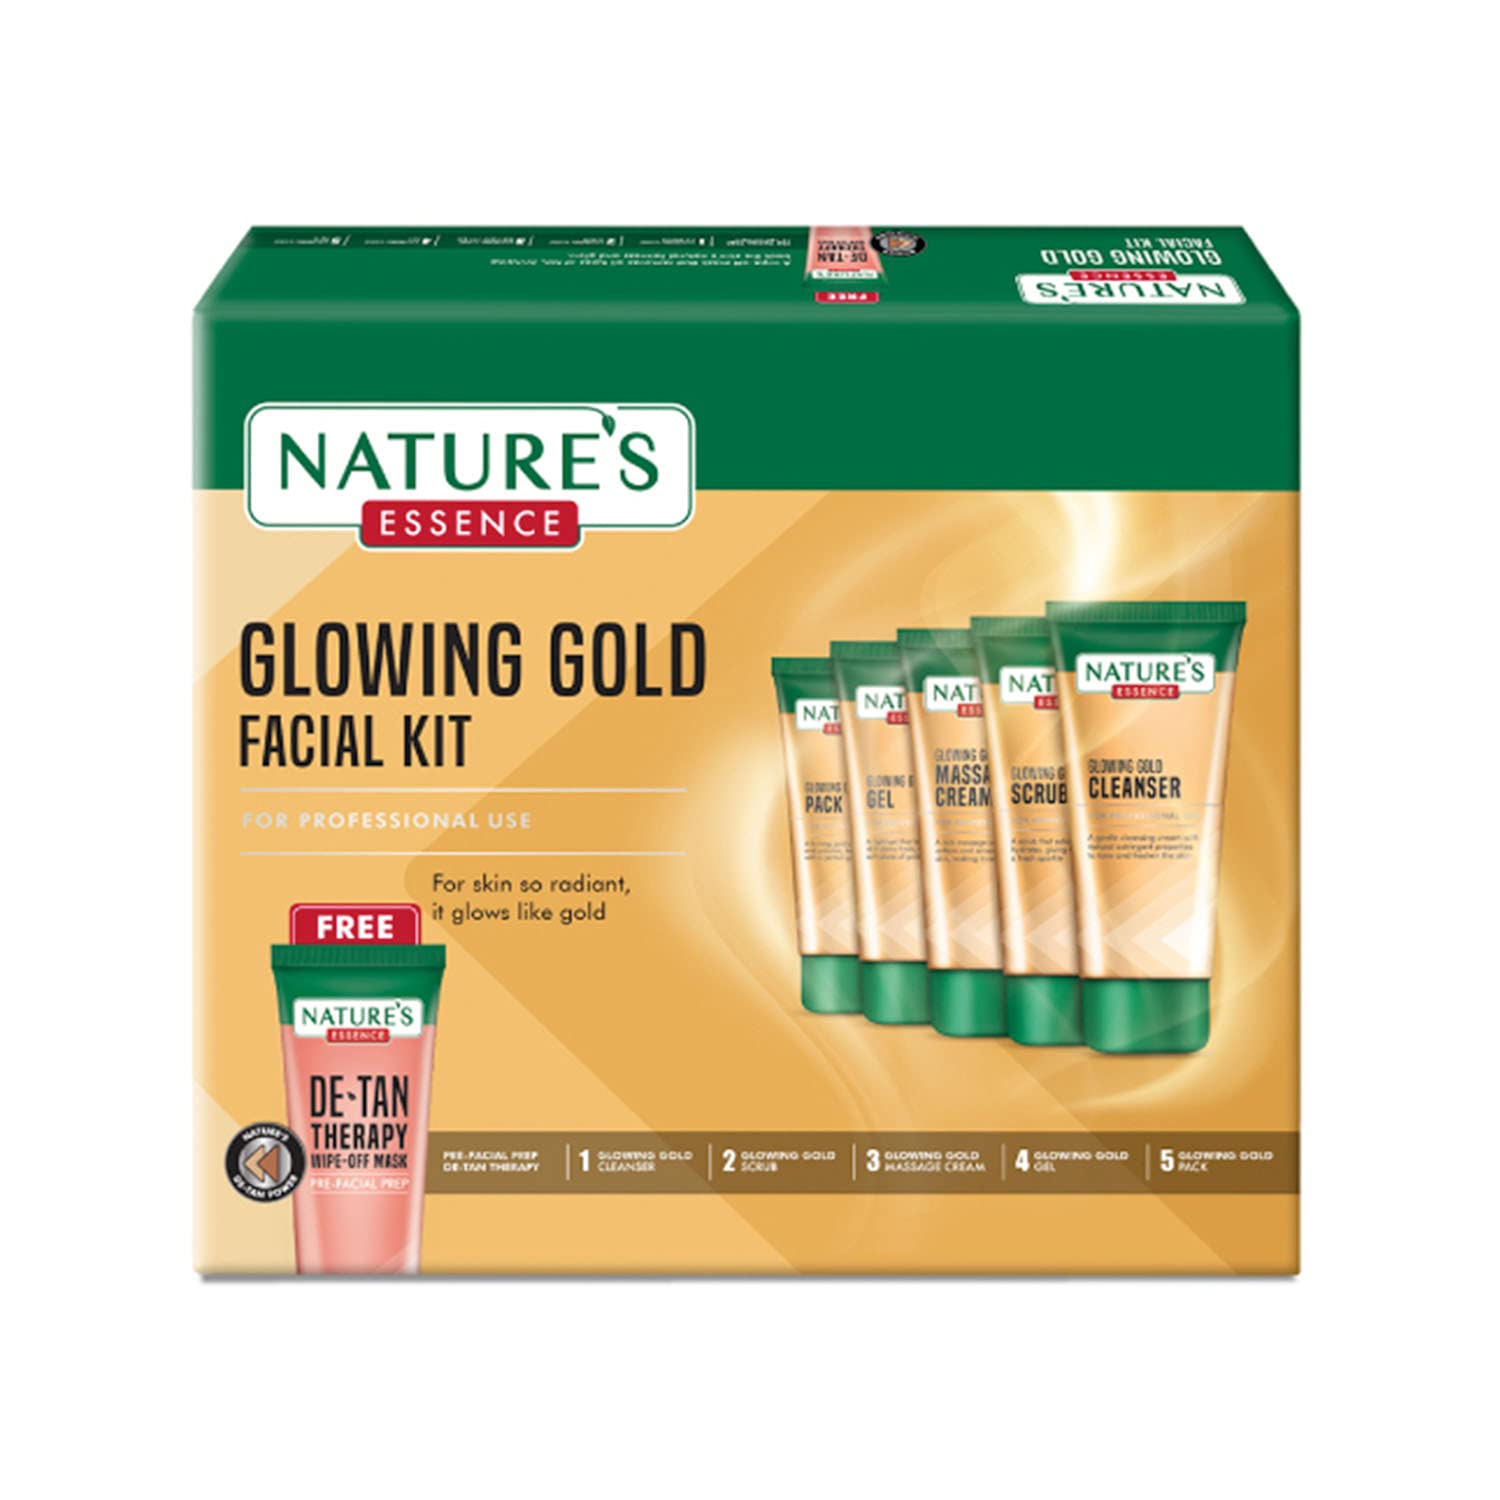 NATURES ESSENCE Glowing Gold Pack (Eco Jar 500g)